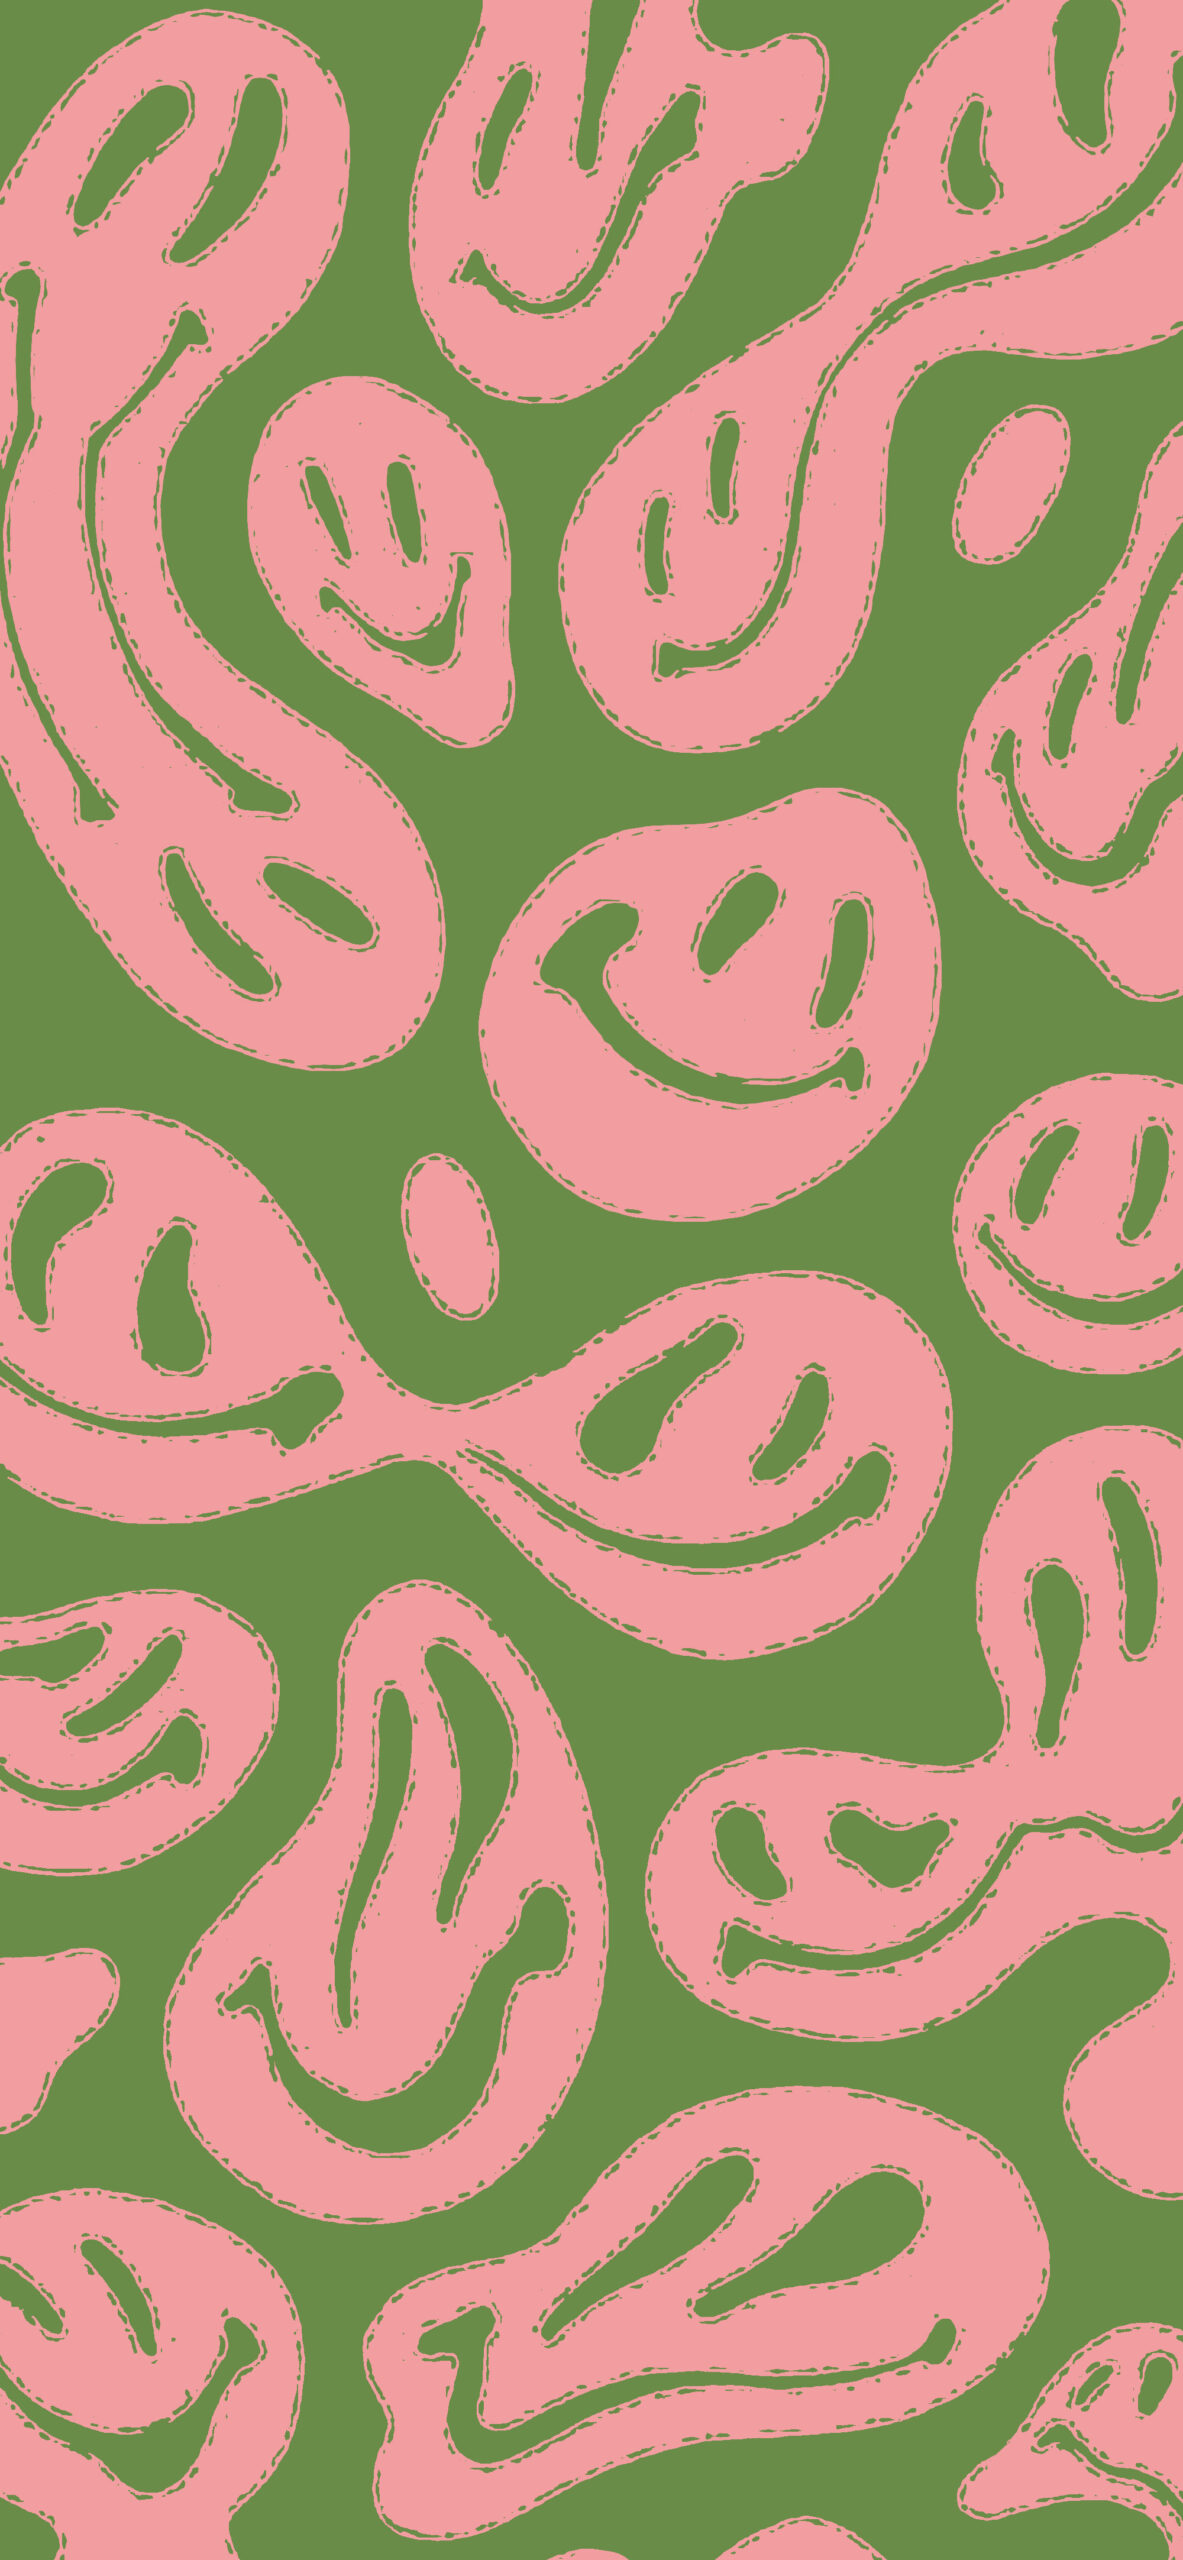 colorful trippy smiley face wallpaper 2